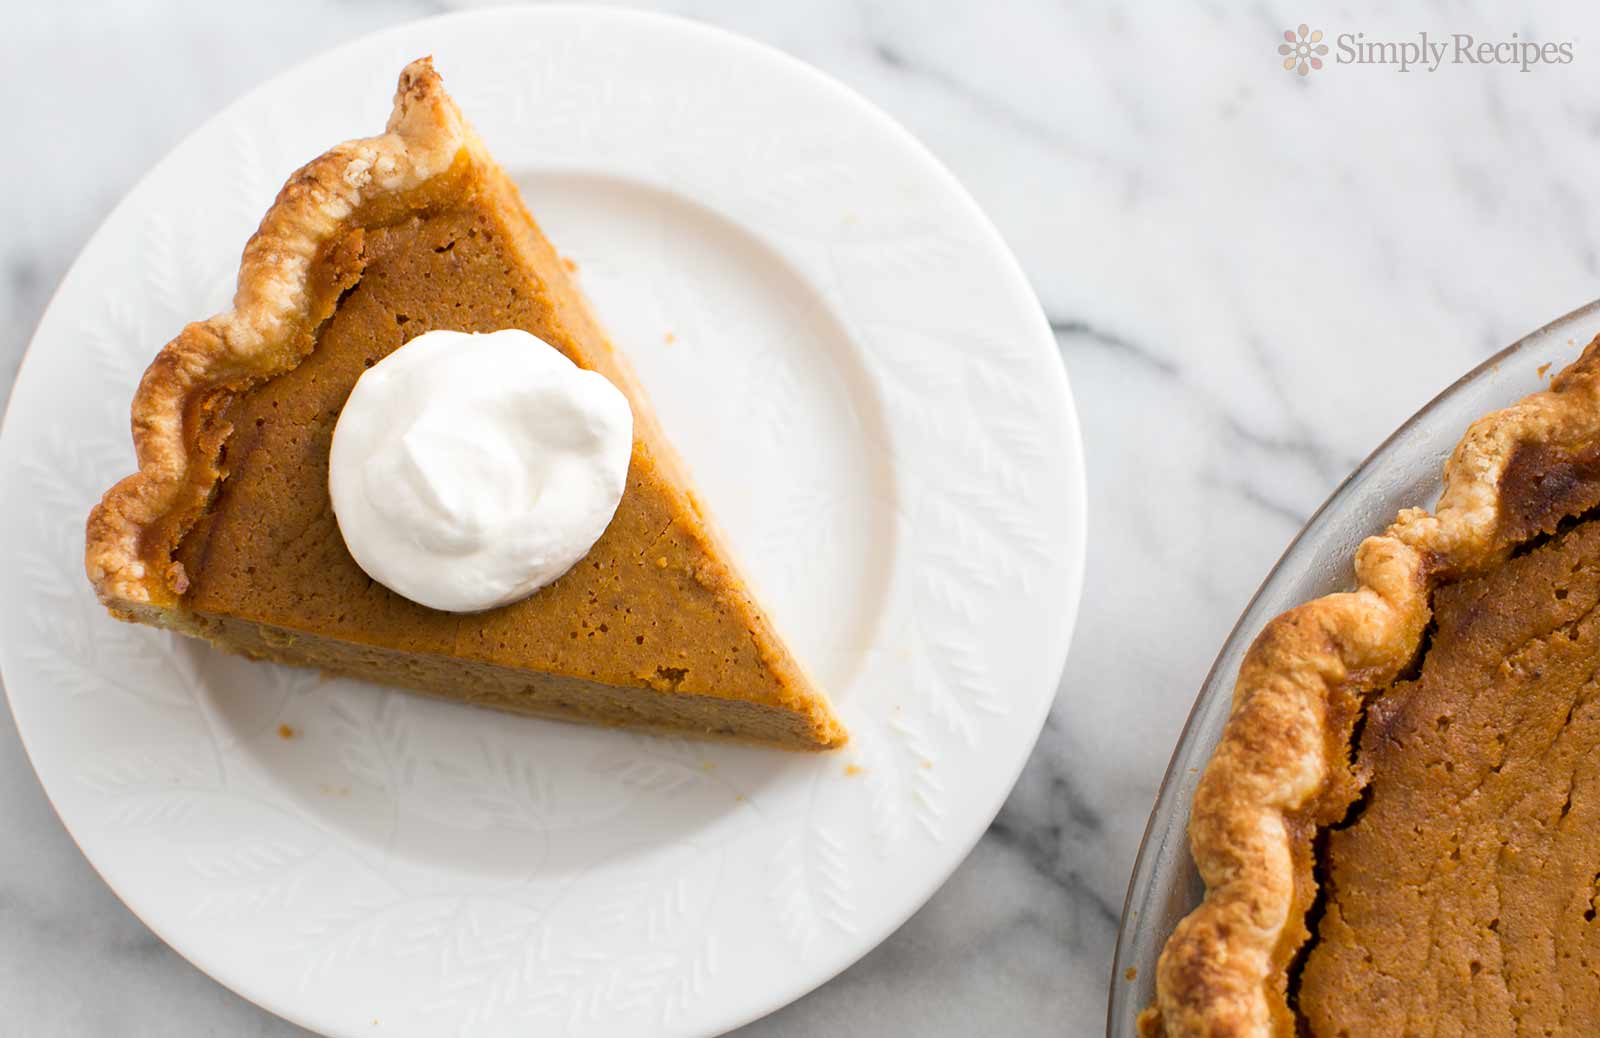 Recipe for Ultimate Pumpkin Pie in the chilling cold